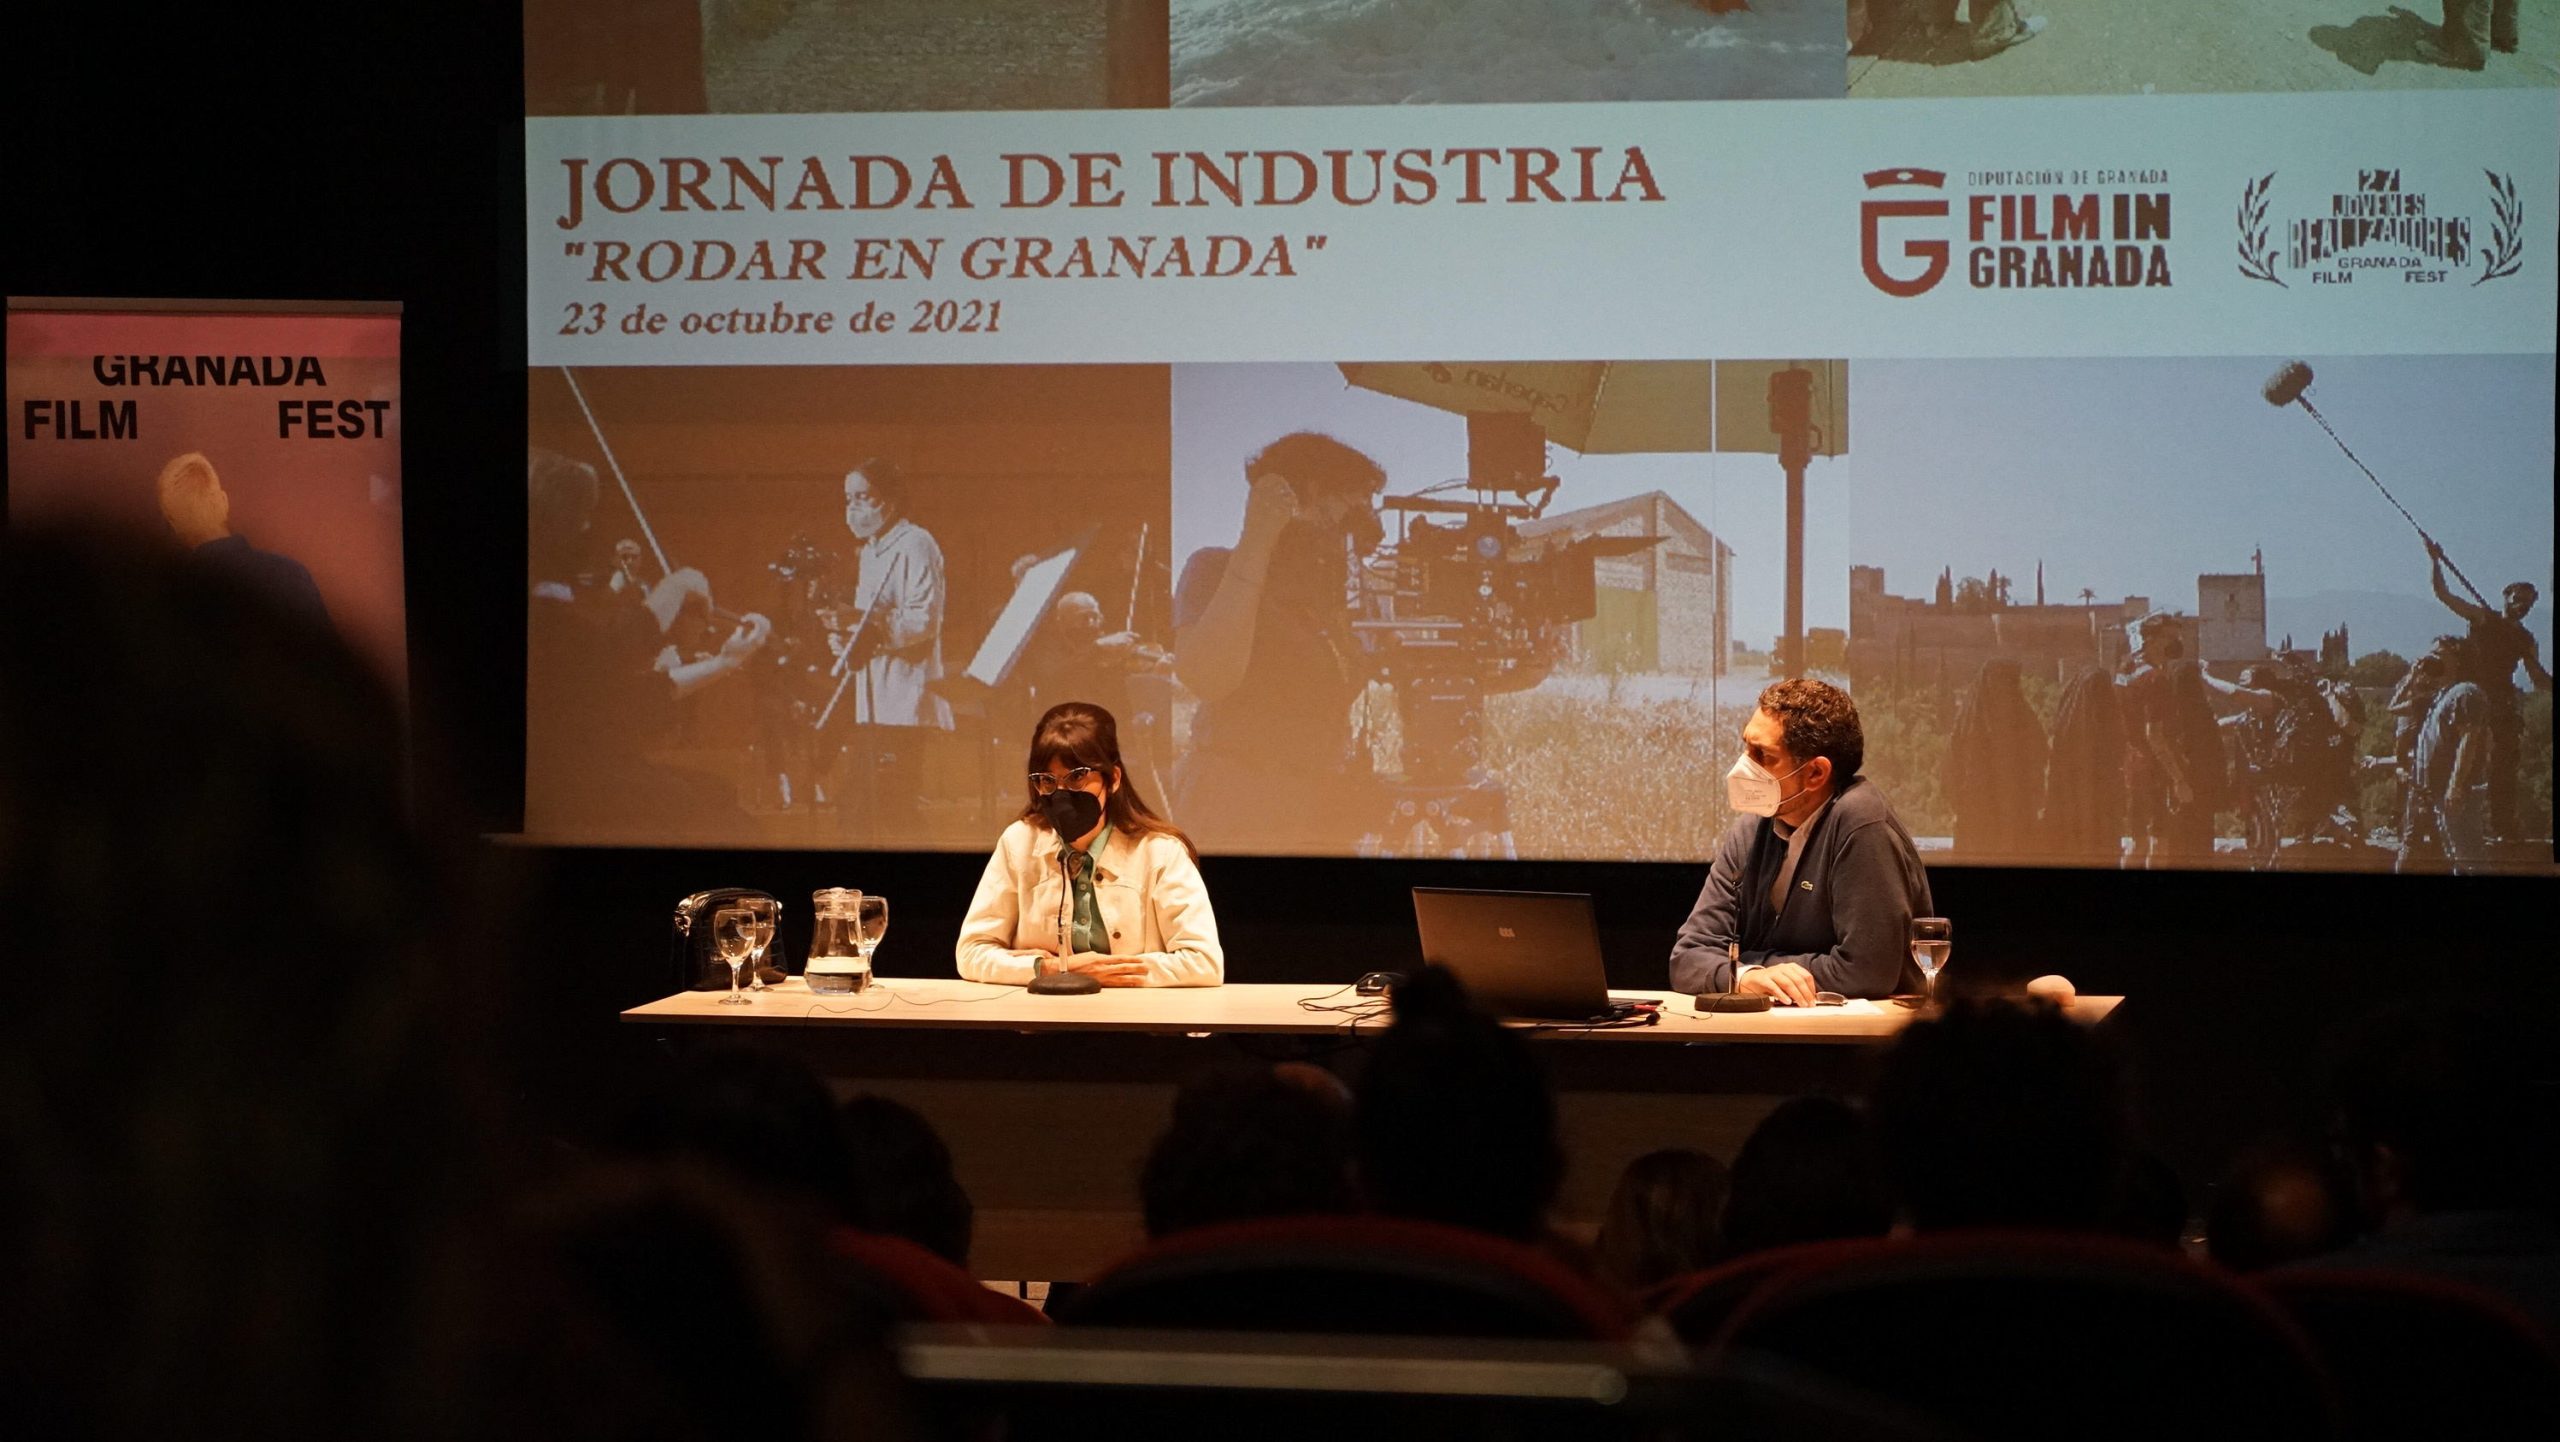 “Film in Granada” has been nominated for Best Diffusion at the 34th Edition of the Asecan Awards